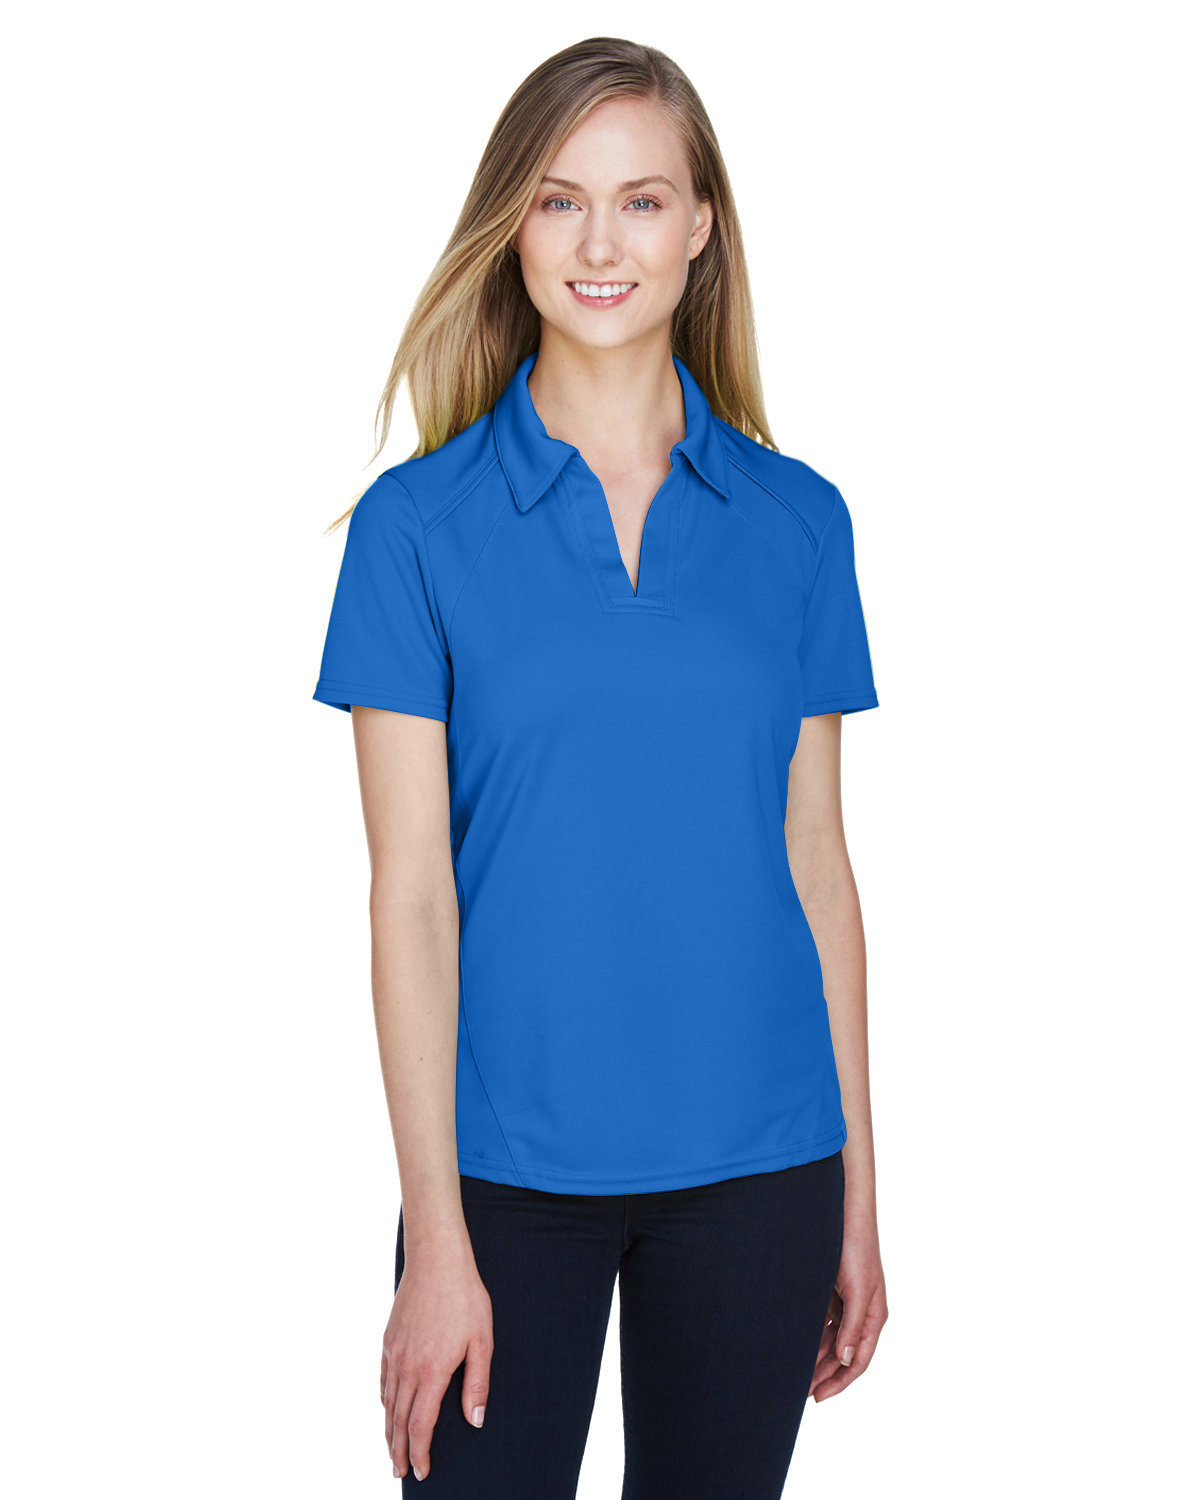 North End Ladies' Recycled Polyester Performance Piqué Polo LT NAUTICAL BLU 